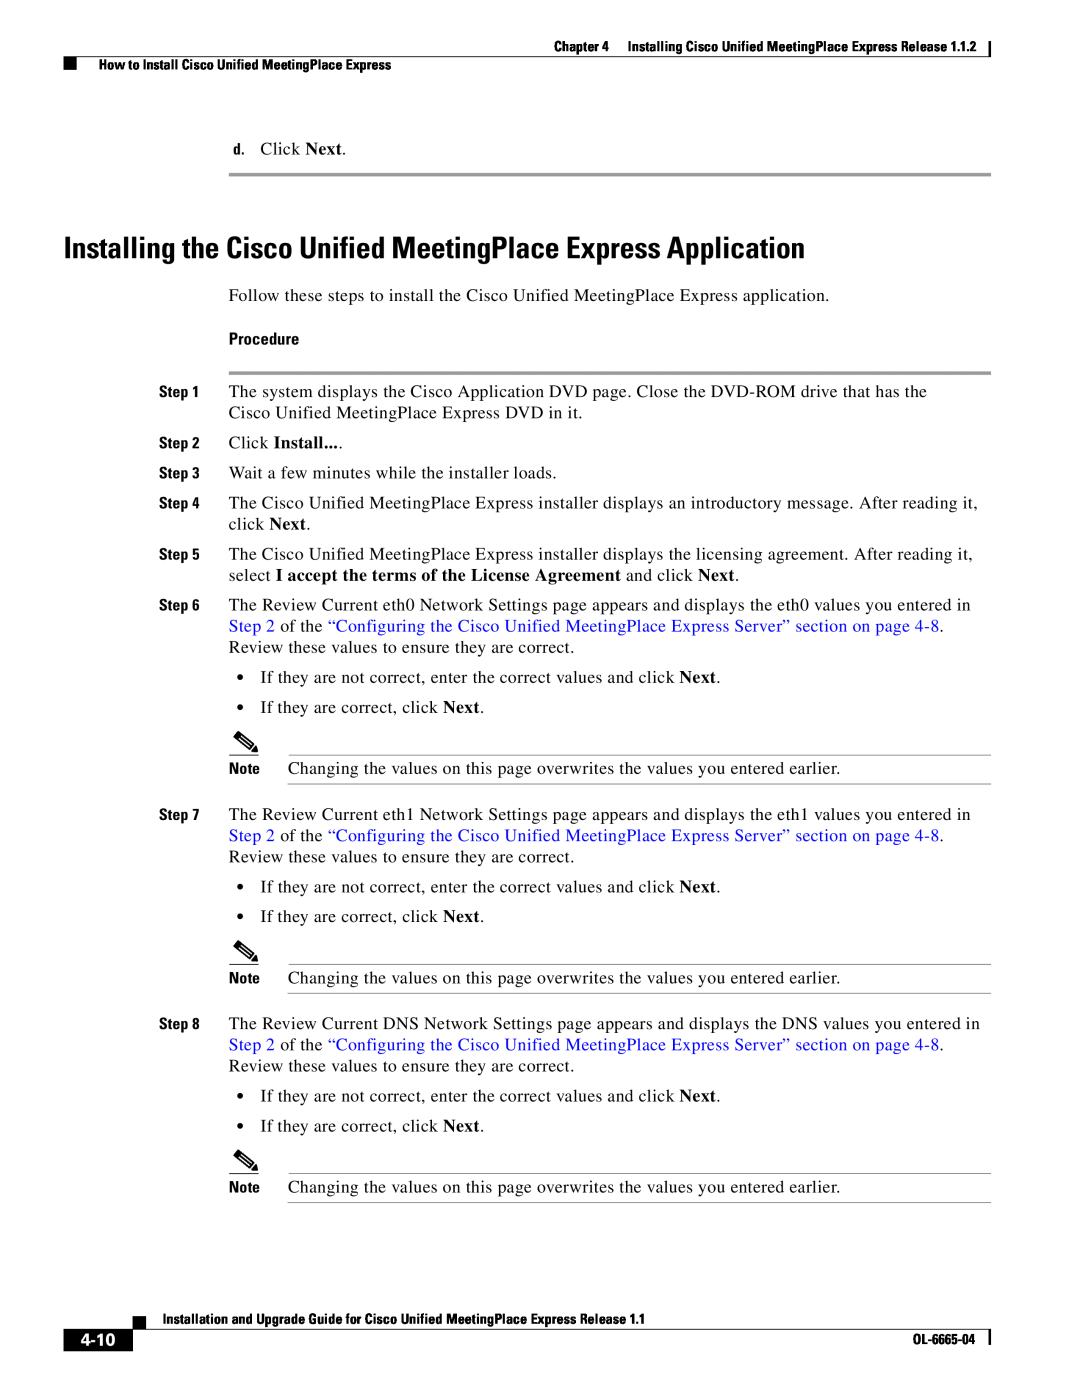 Cisco Systems MCS 7825 manual Installing the Cisco Unified MeetingPlace Express Application, 4-10, Procedure, Click Install 